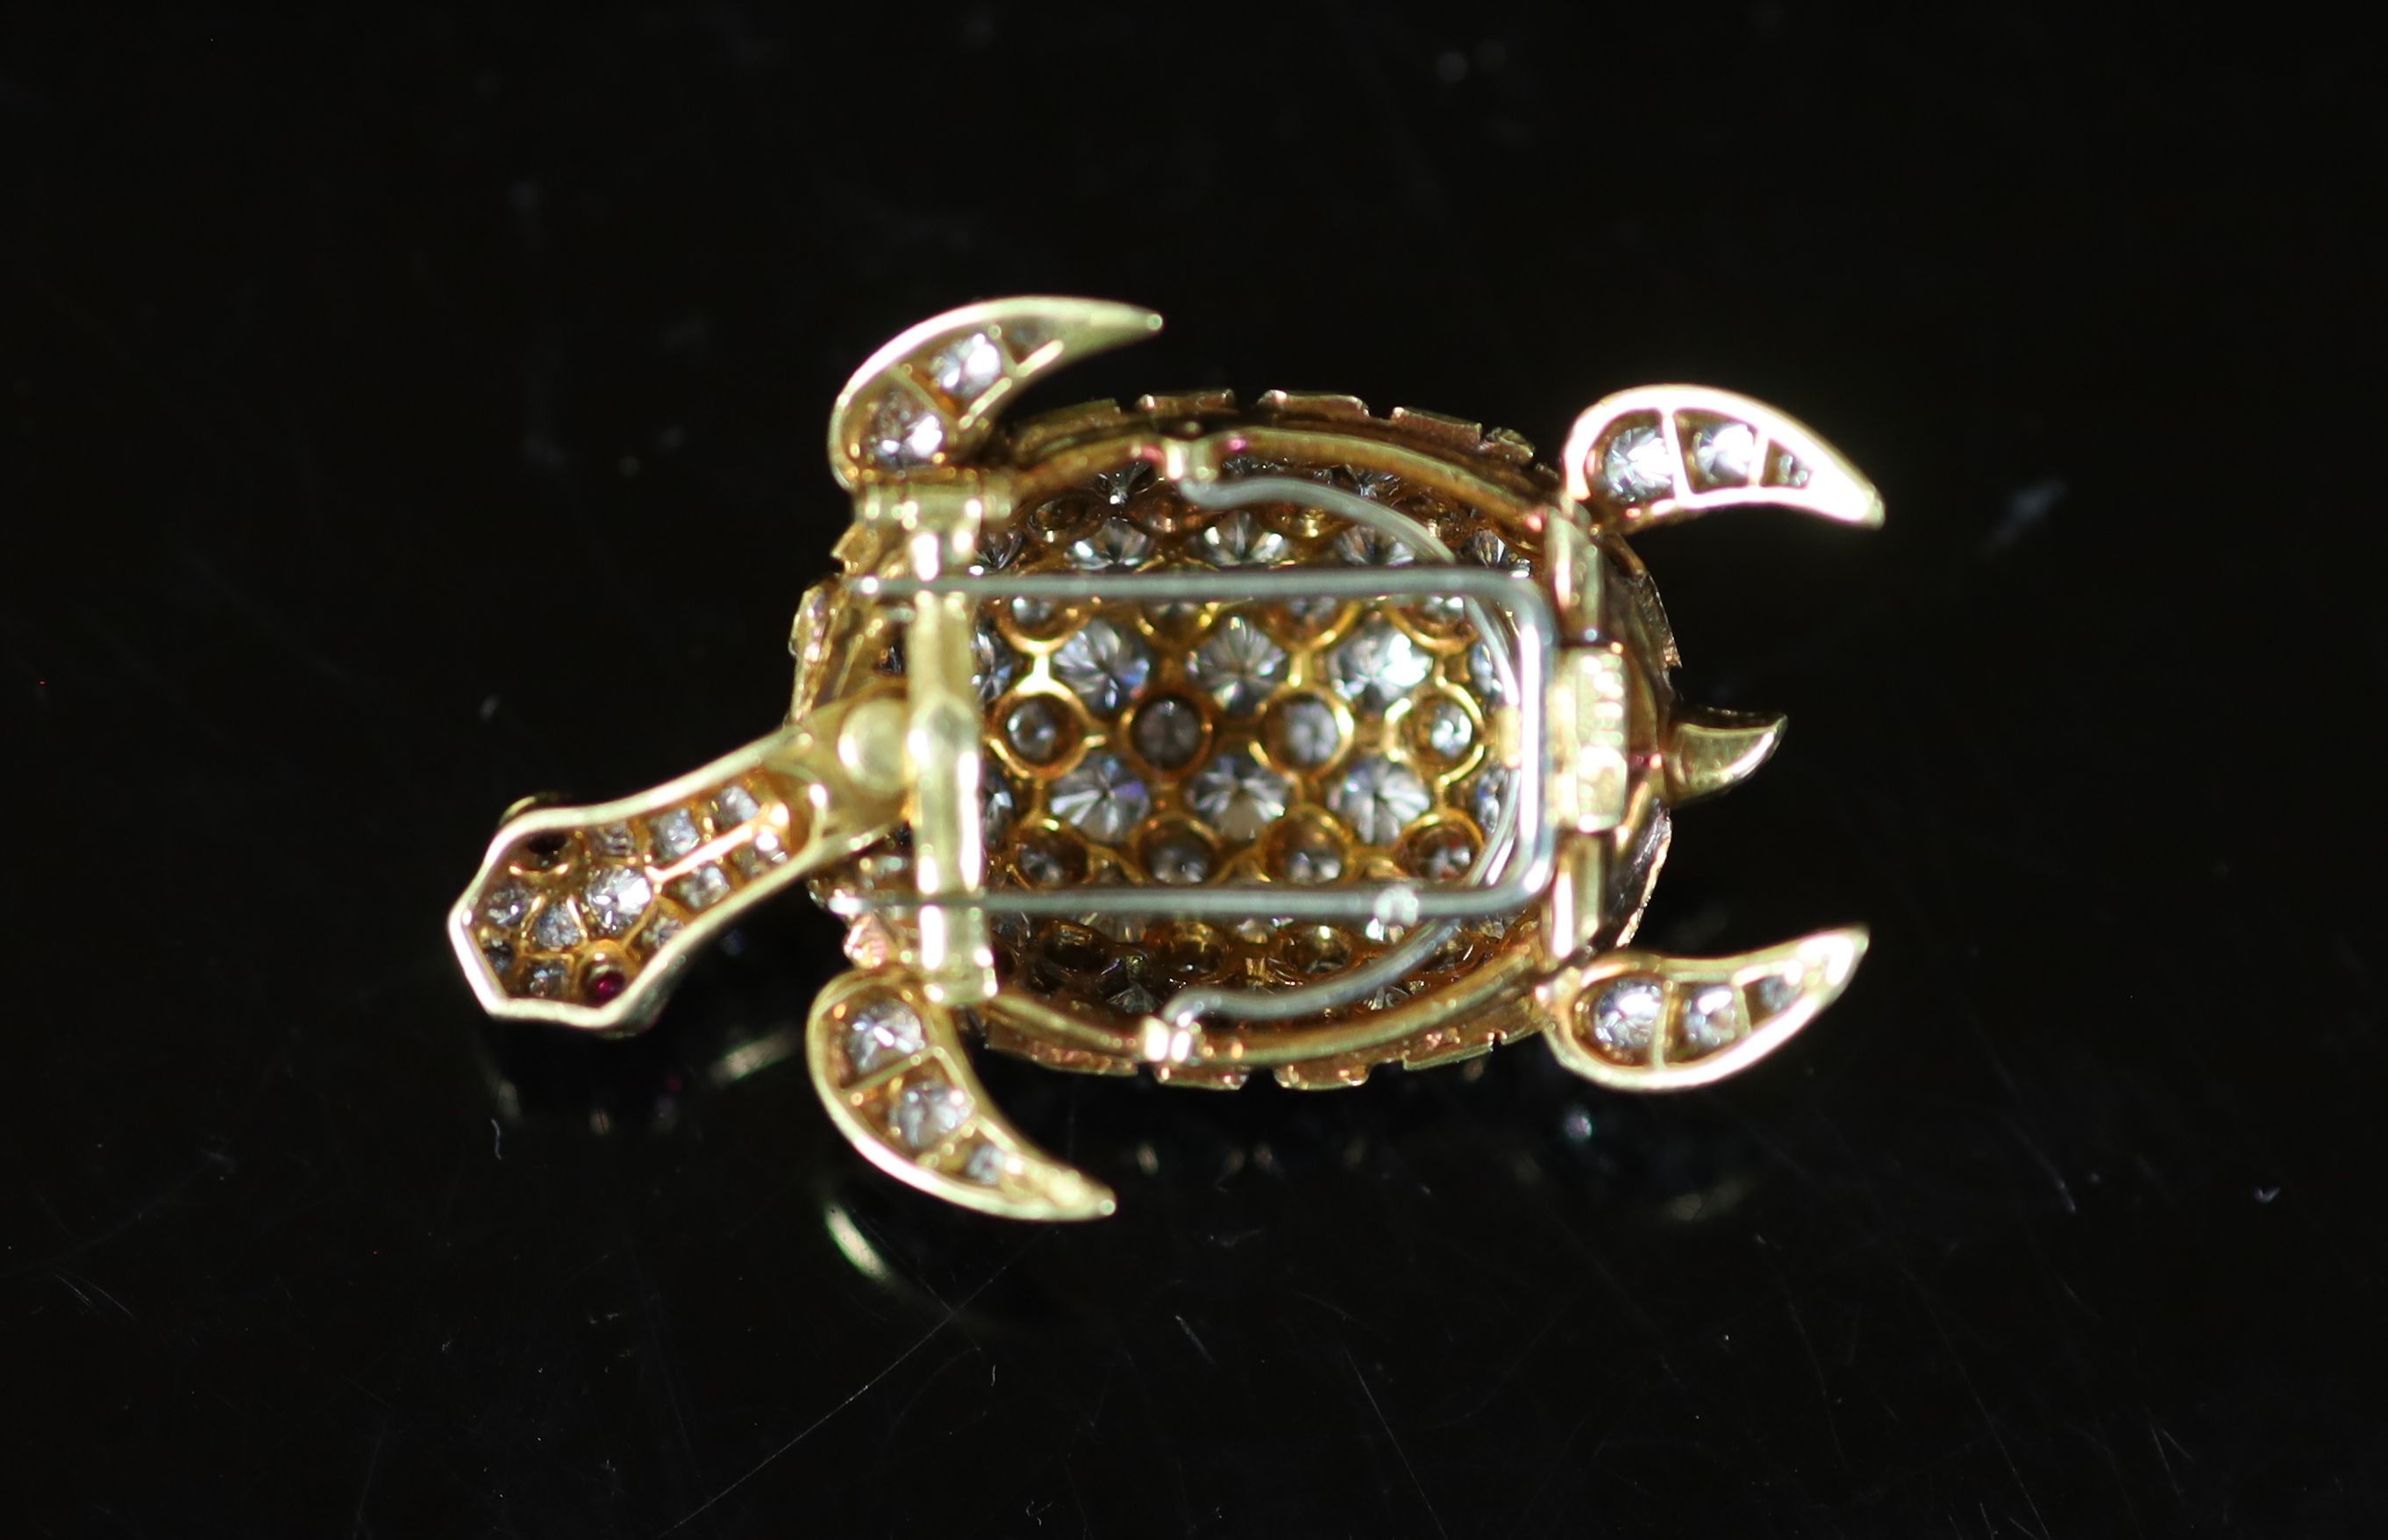 A mid to late 20th century French 18kt gold and pave set diamond clip brooch, modelled as a turtle, - Image 3 of 3